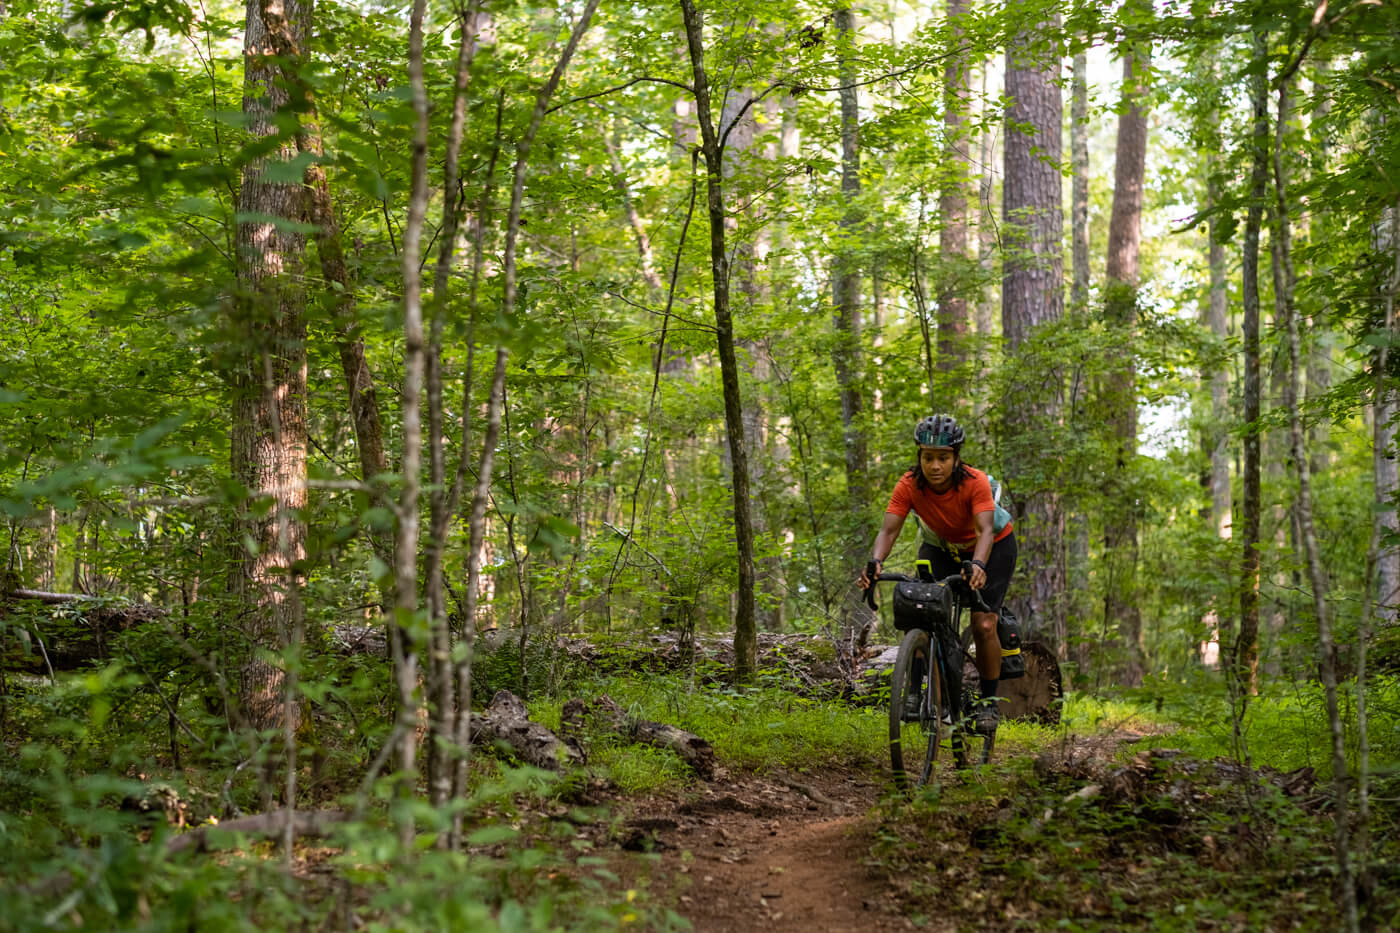 A woman rides her mountian bike through the forest.